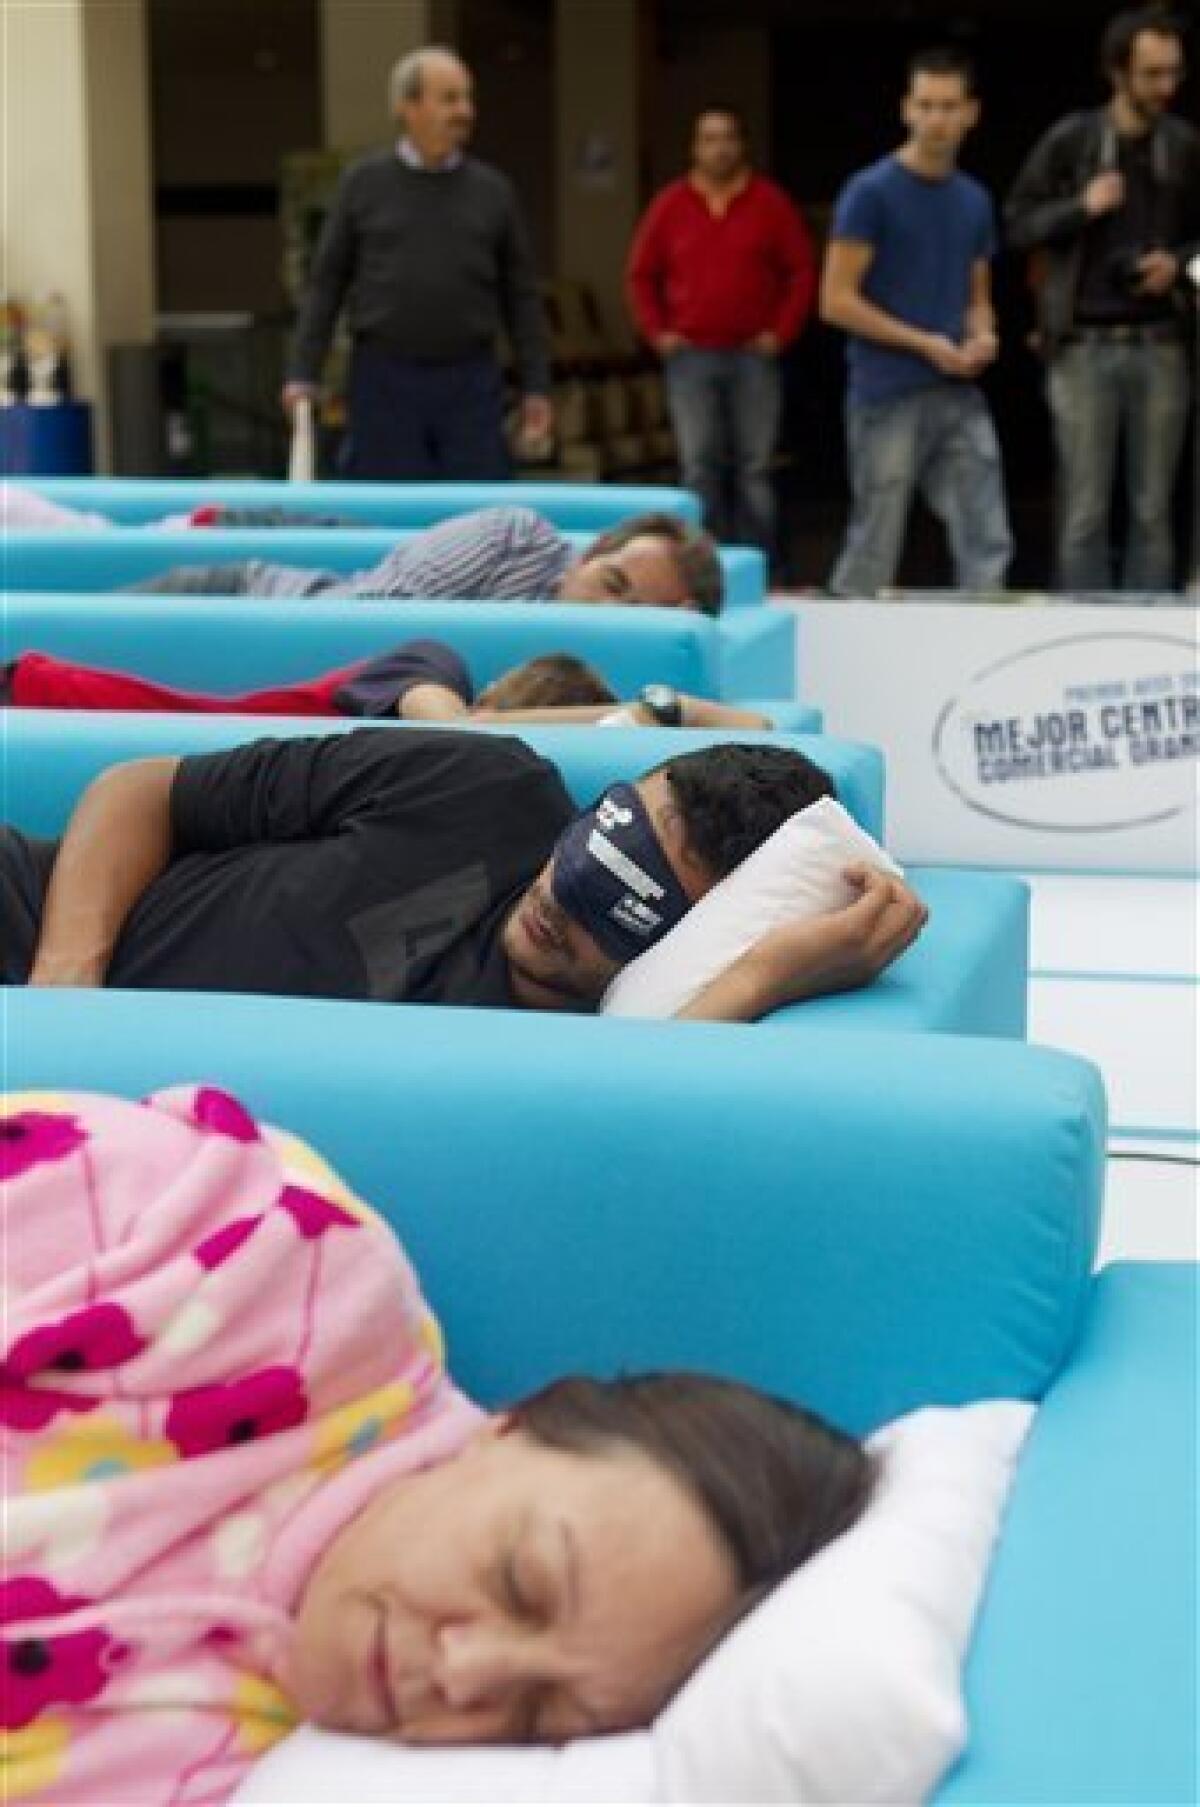 Ready, set, snore! Spain holds siesta contest - The San Diego Union-Tribune